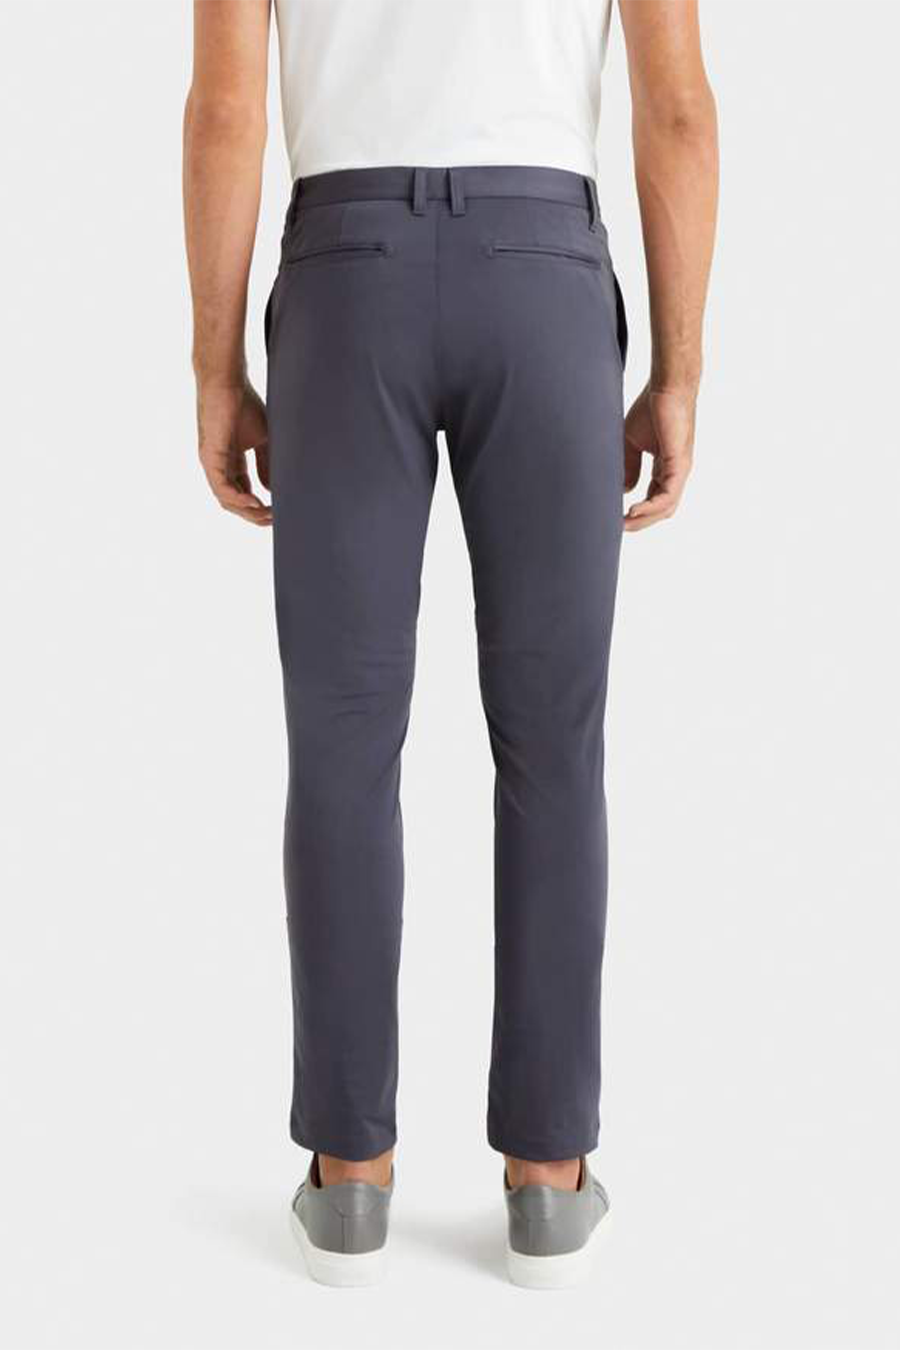 Commuter Pant Slim | Iron - Main Image Number 2 of 2